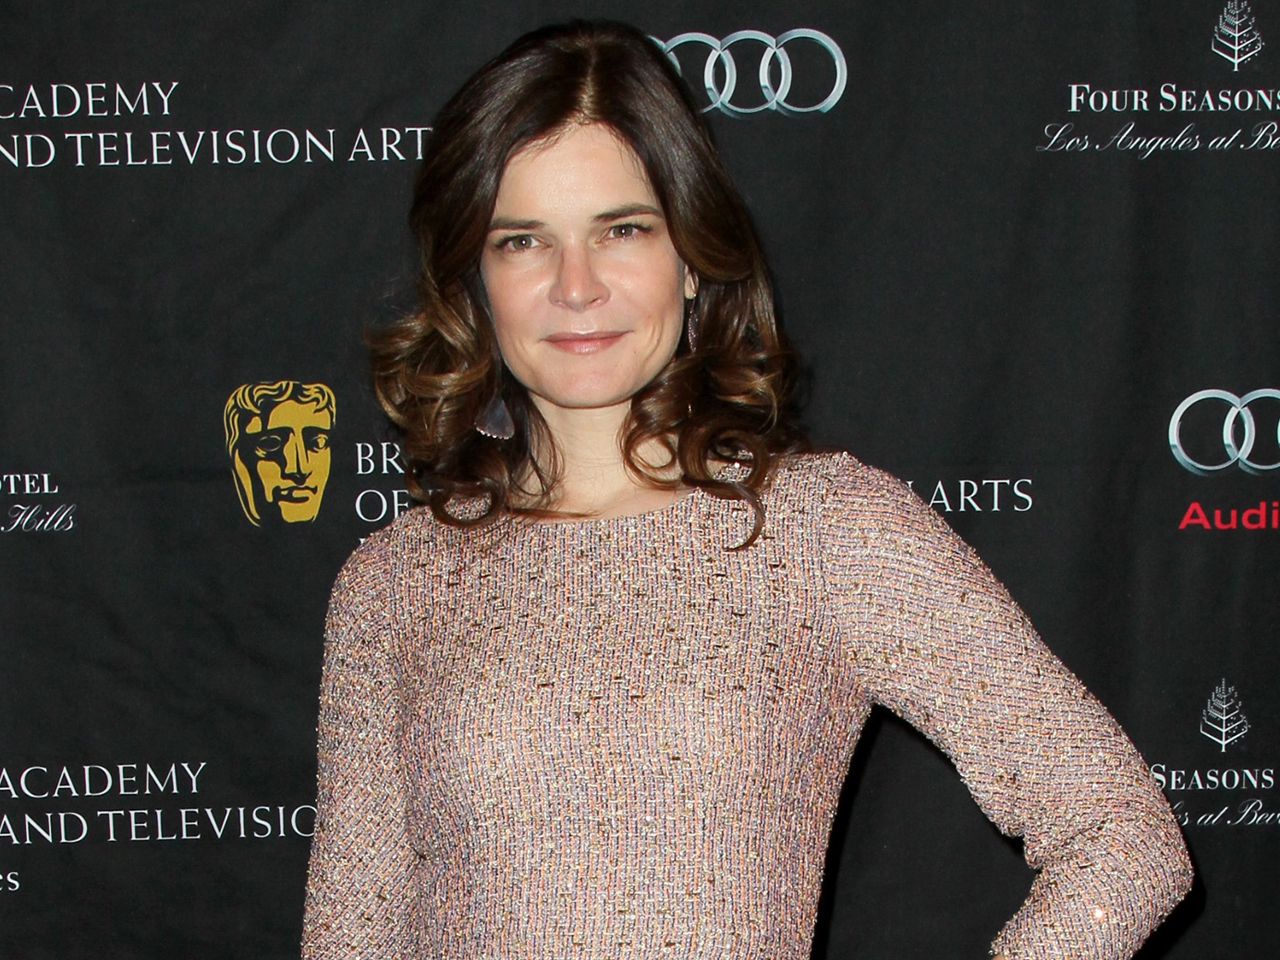 Betsy Brandt of "Breaking Bad" to play Michael J. Fox's wife on new series - CBS